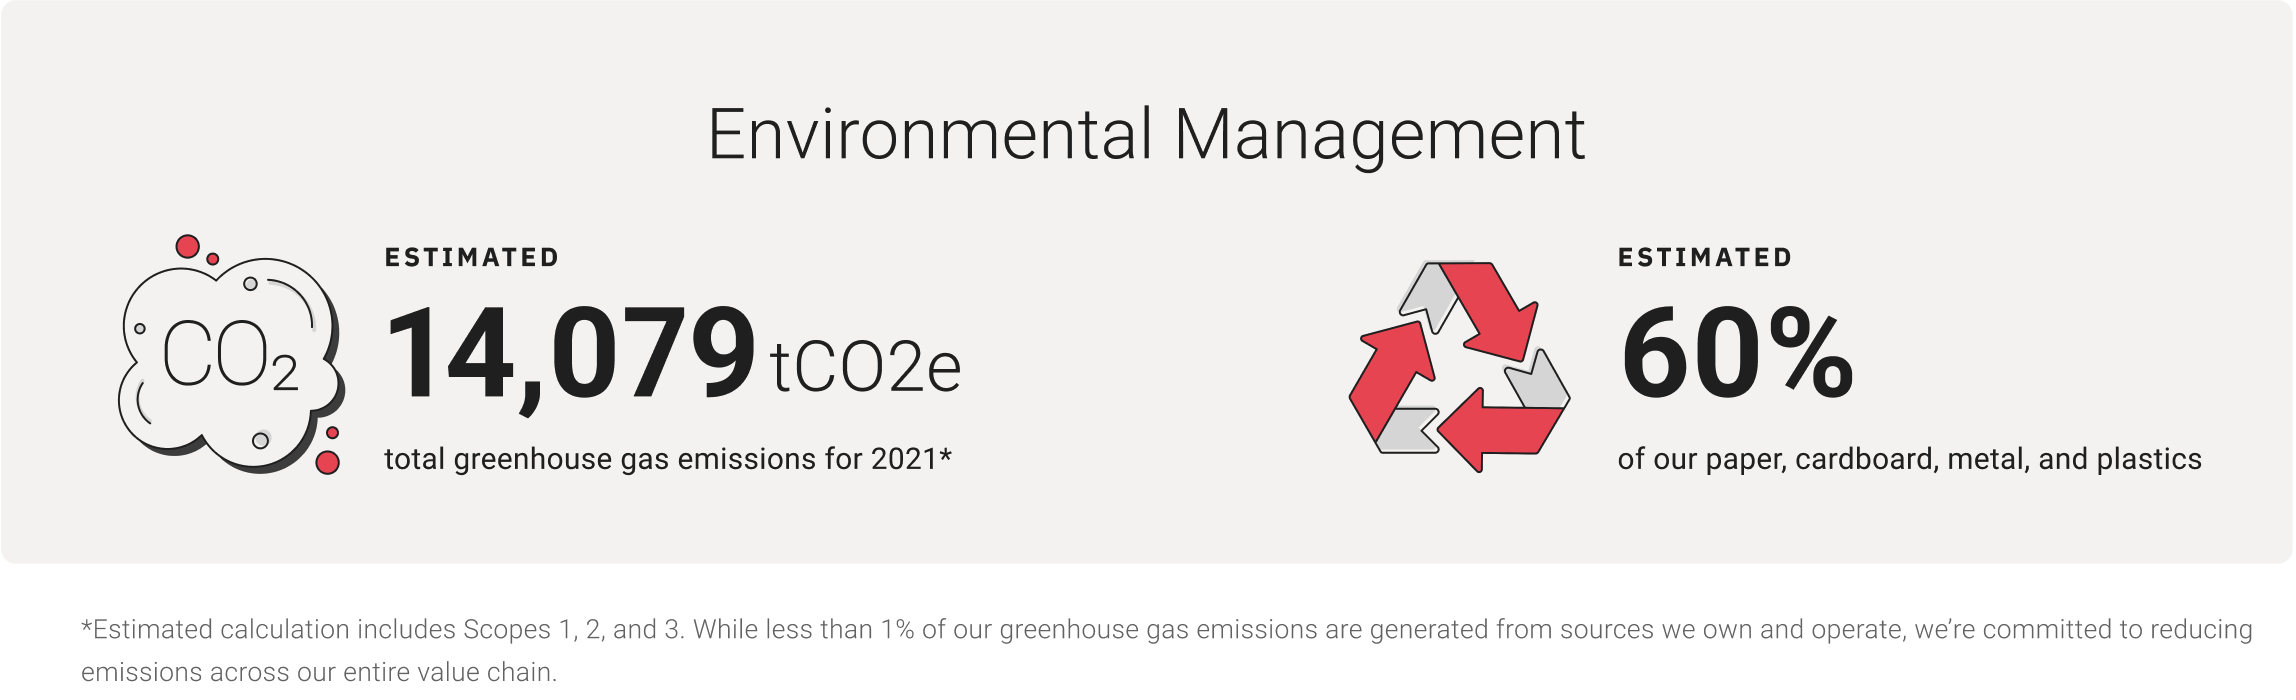 Environmental Management - Estimated 14,079 tCO2e total total greenhouse gas emissions for 2021. Estimated 60% of our paper, cardboard, metal, and plastics